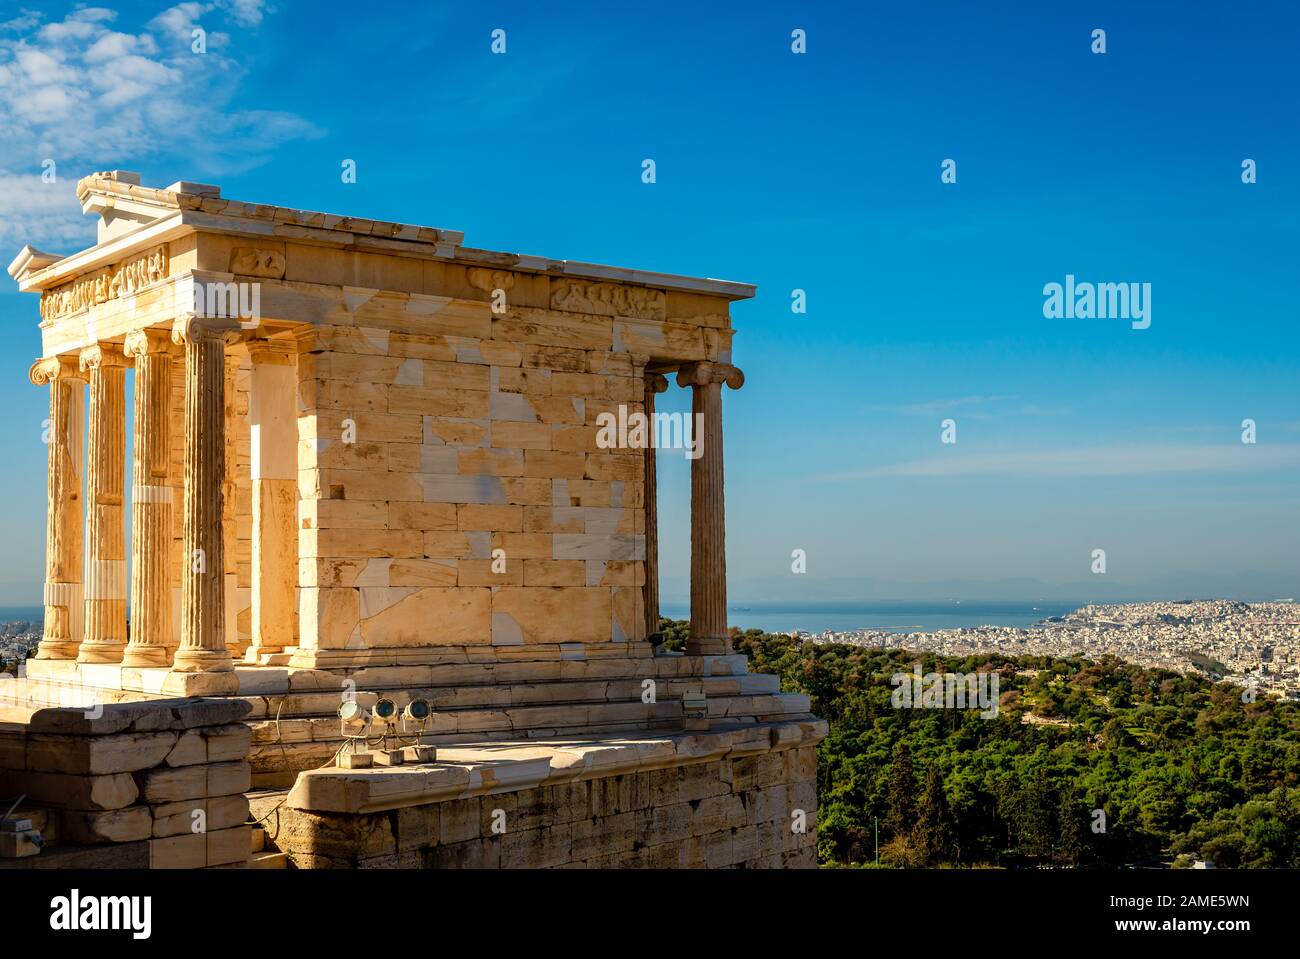 The Temple of Athena Nike, on the Acropolis of Athens, Greece, named after the Greek goddess Athena. Philopappos Hill, Piraeus and the saronic gulf ar Stock Photo